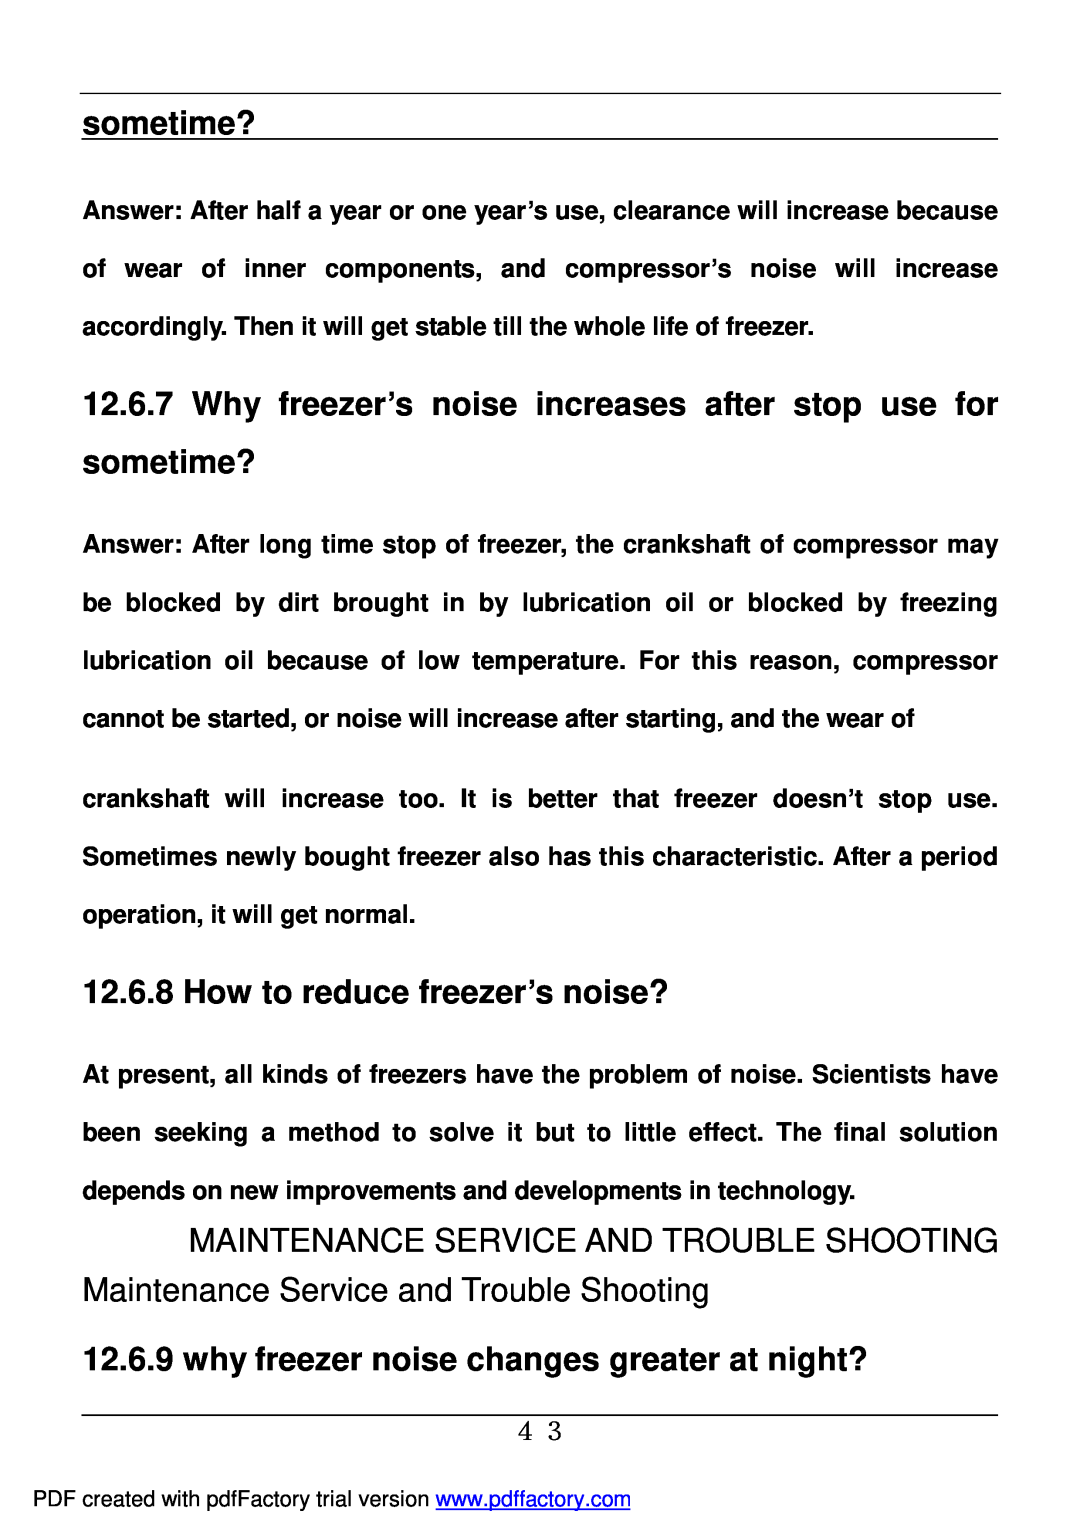 Haier BD-478A service manual Why freezer’s noise increases after stop use for sometime?, How to reduce freezer’s noise? 